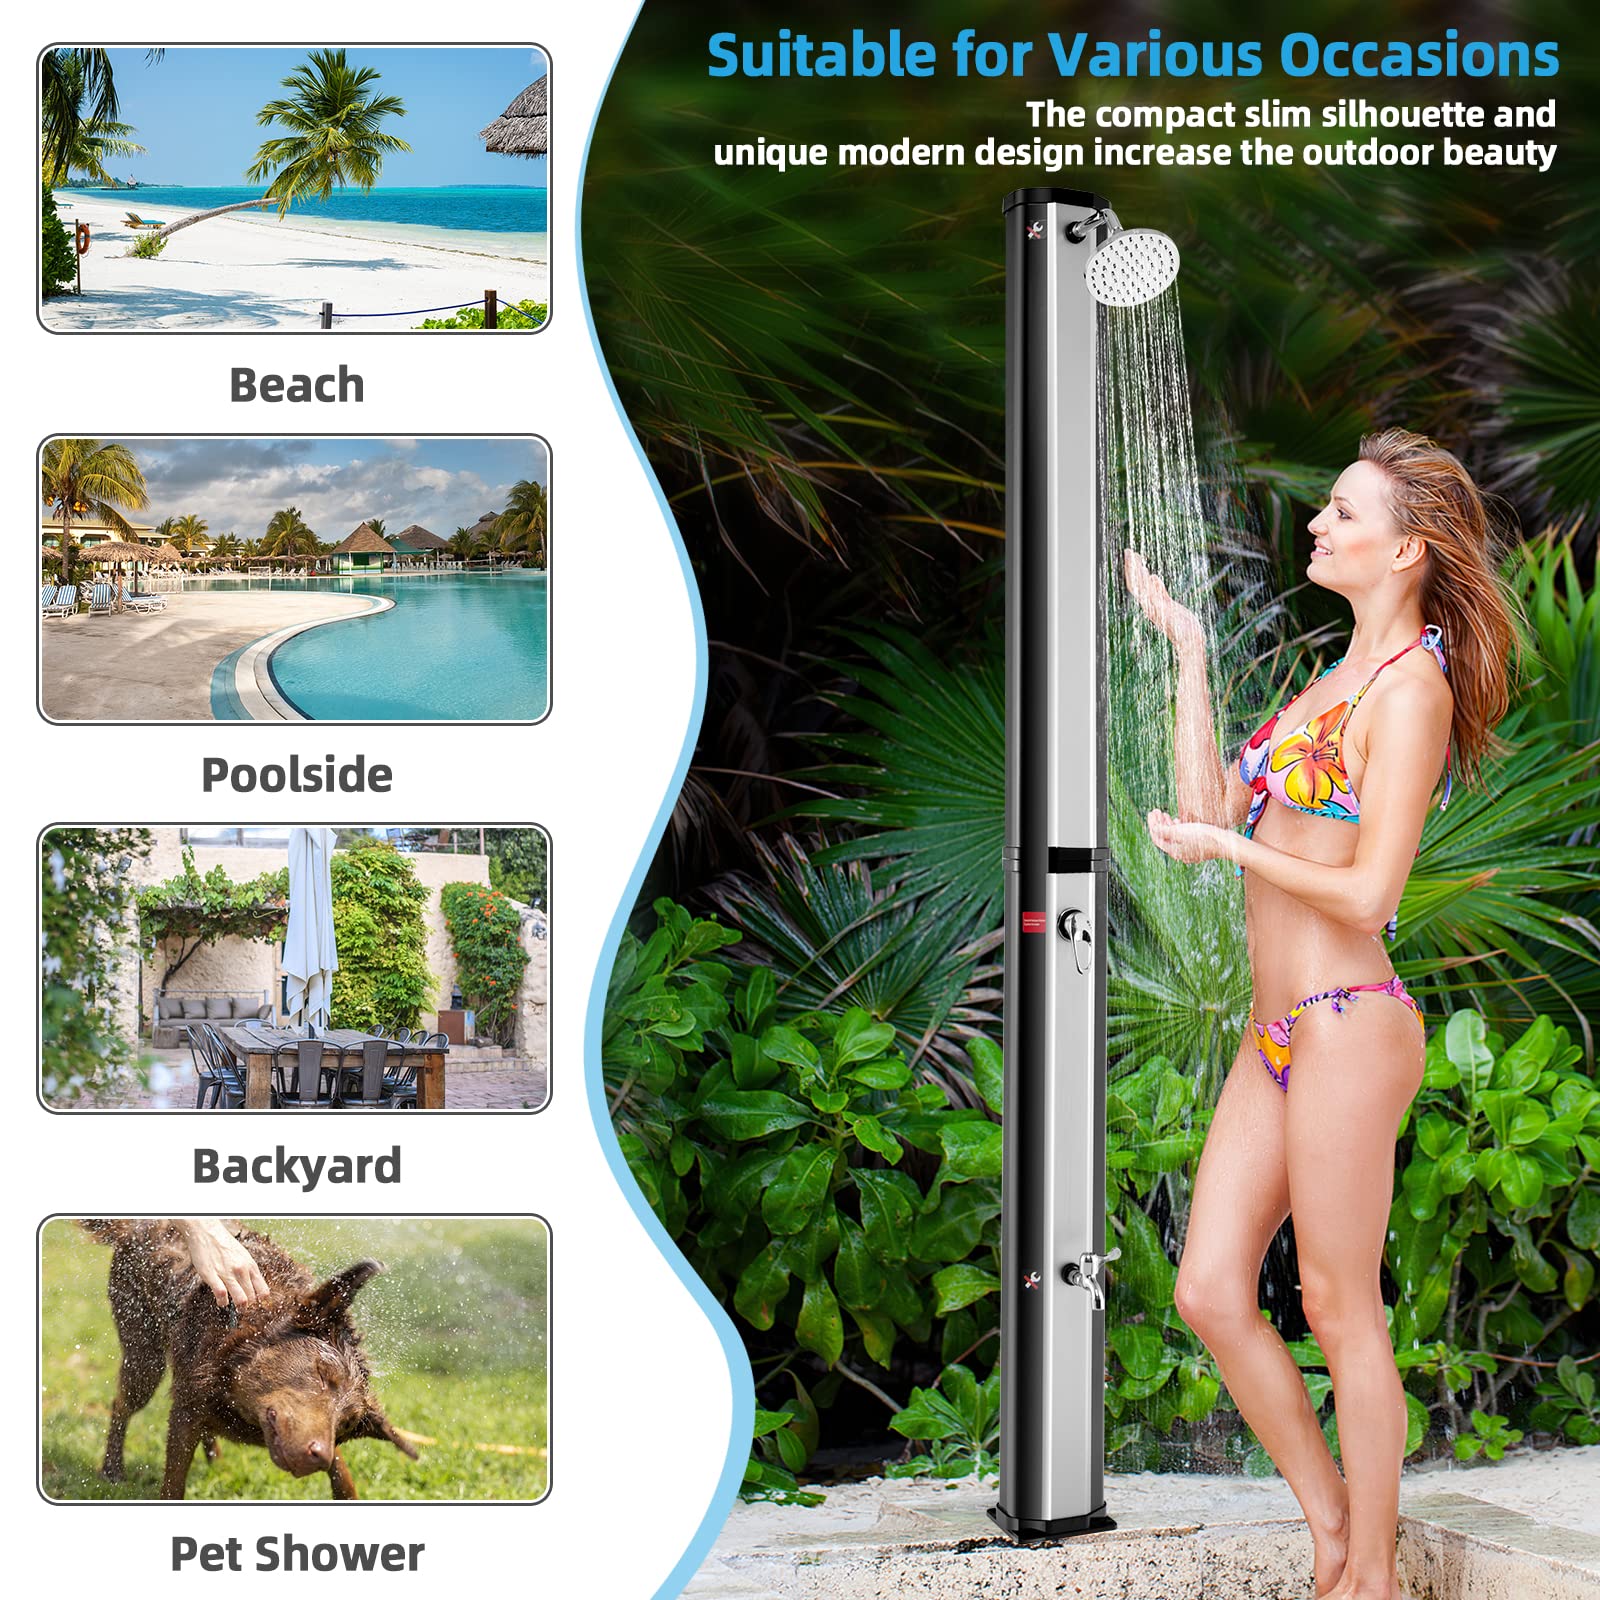 Giantex 7.2 FT 10 Gallon 2-Section Solar-Heated Outdoor Shower, Pool Shower W/Free-Rotating Shower Head